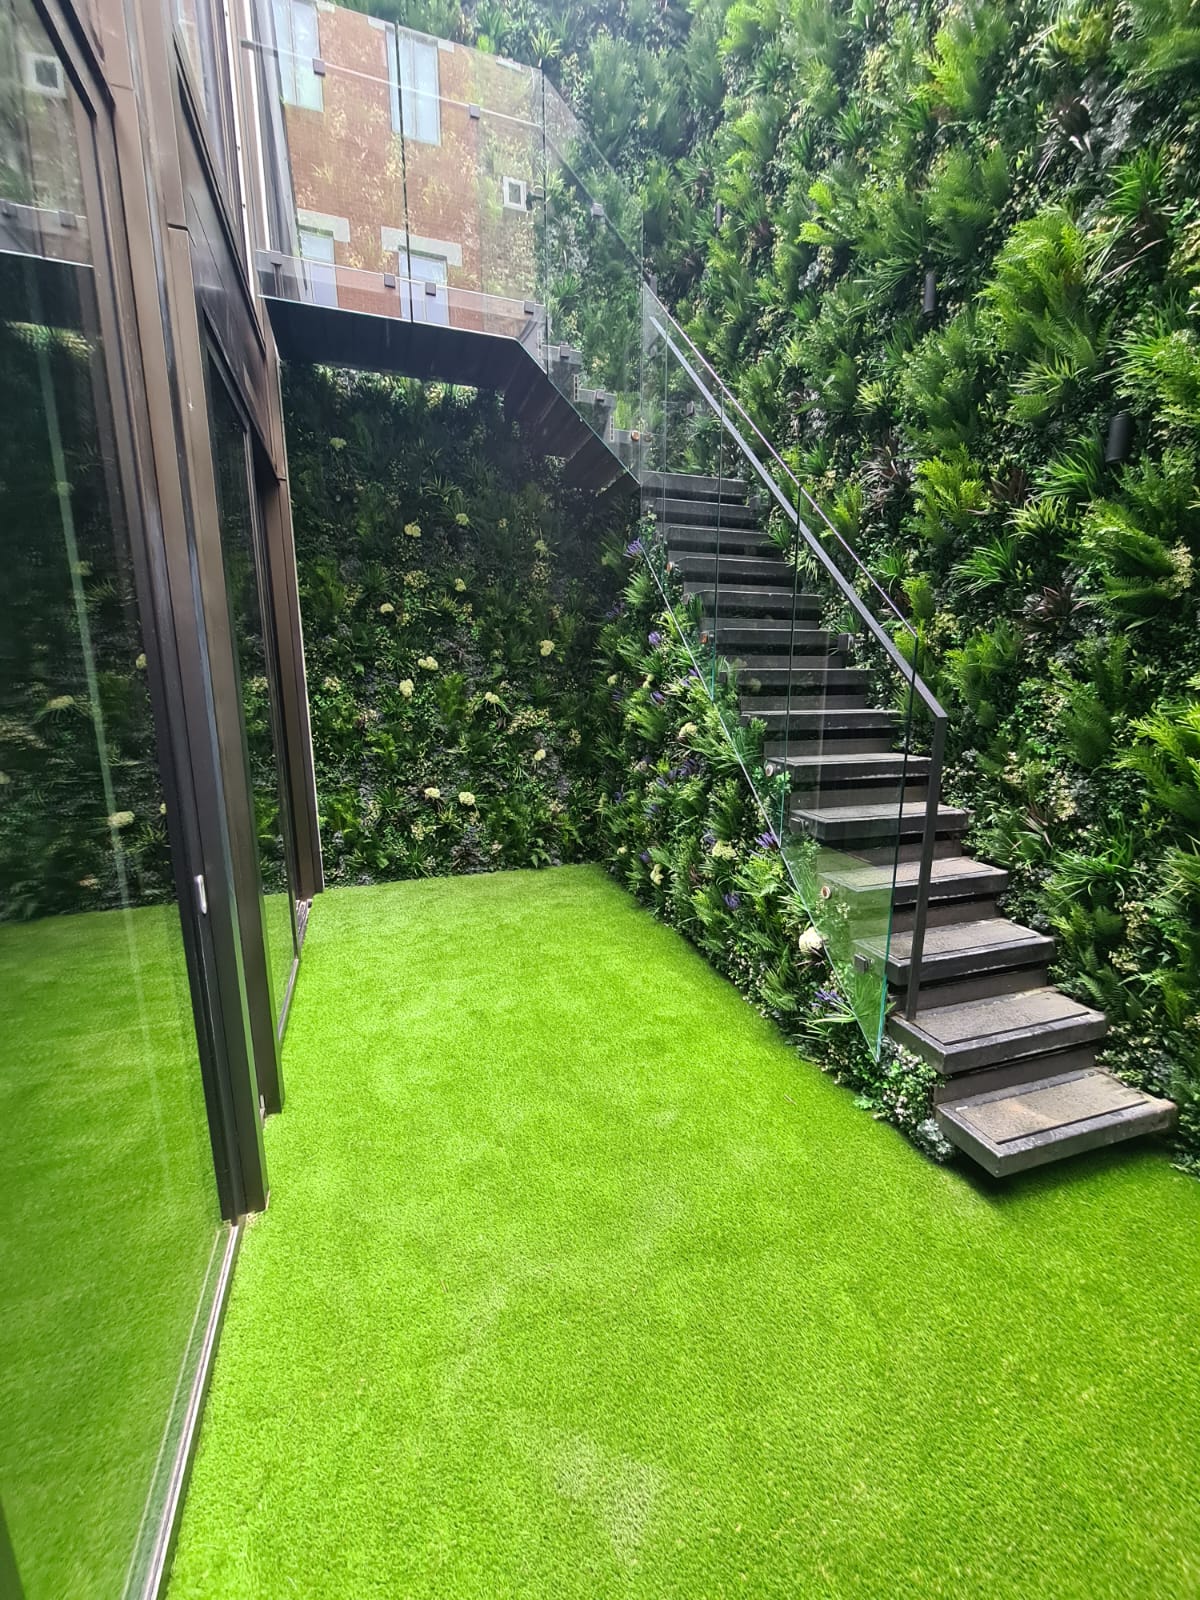 Basement staircase, surrounded by Artificial Green Wall